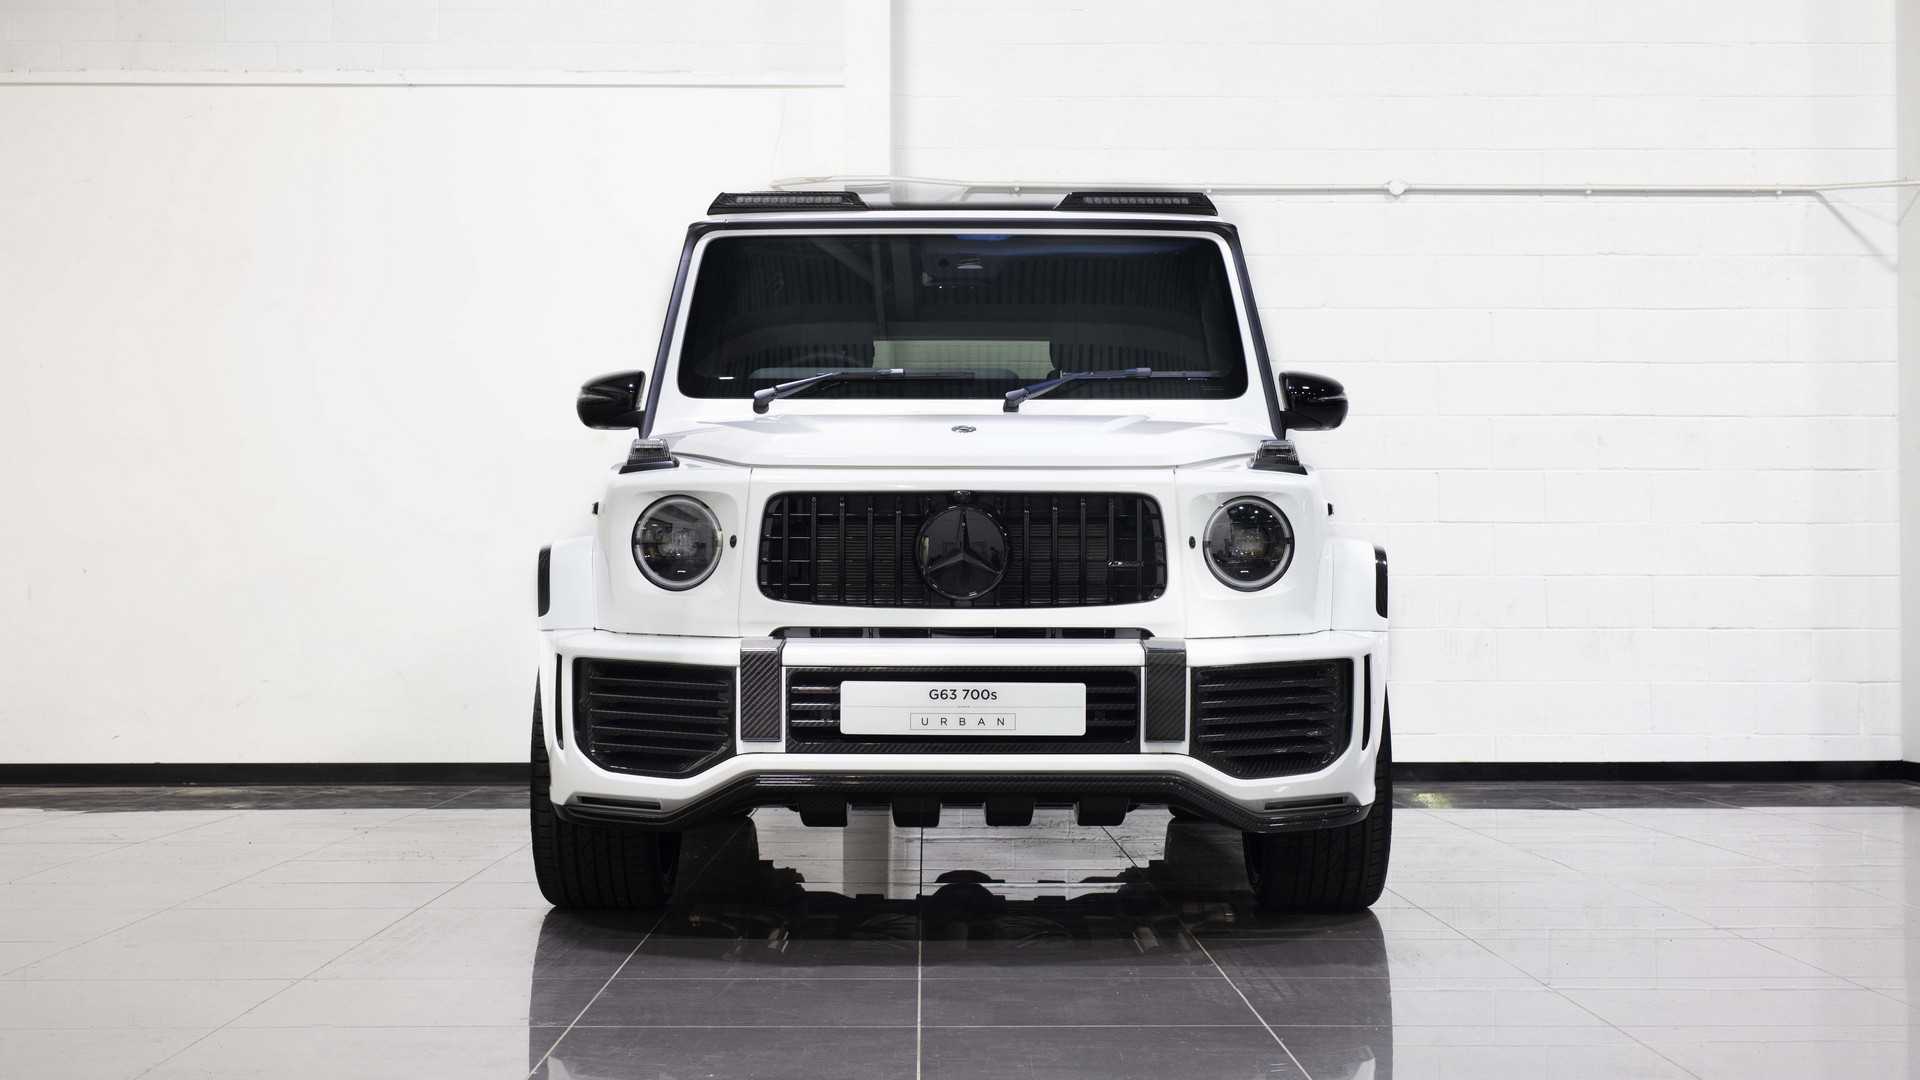 Widebody 2019 Mercedes-AMG G63 Is An Ode To Carbon Fiber